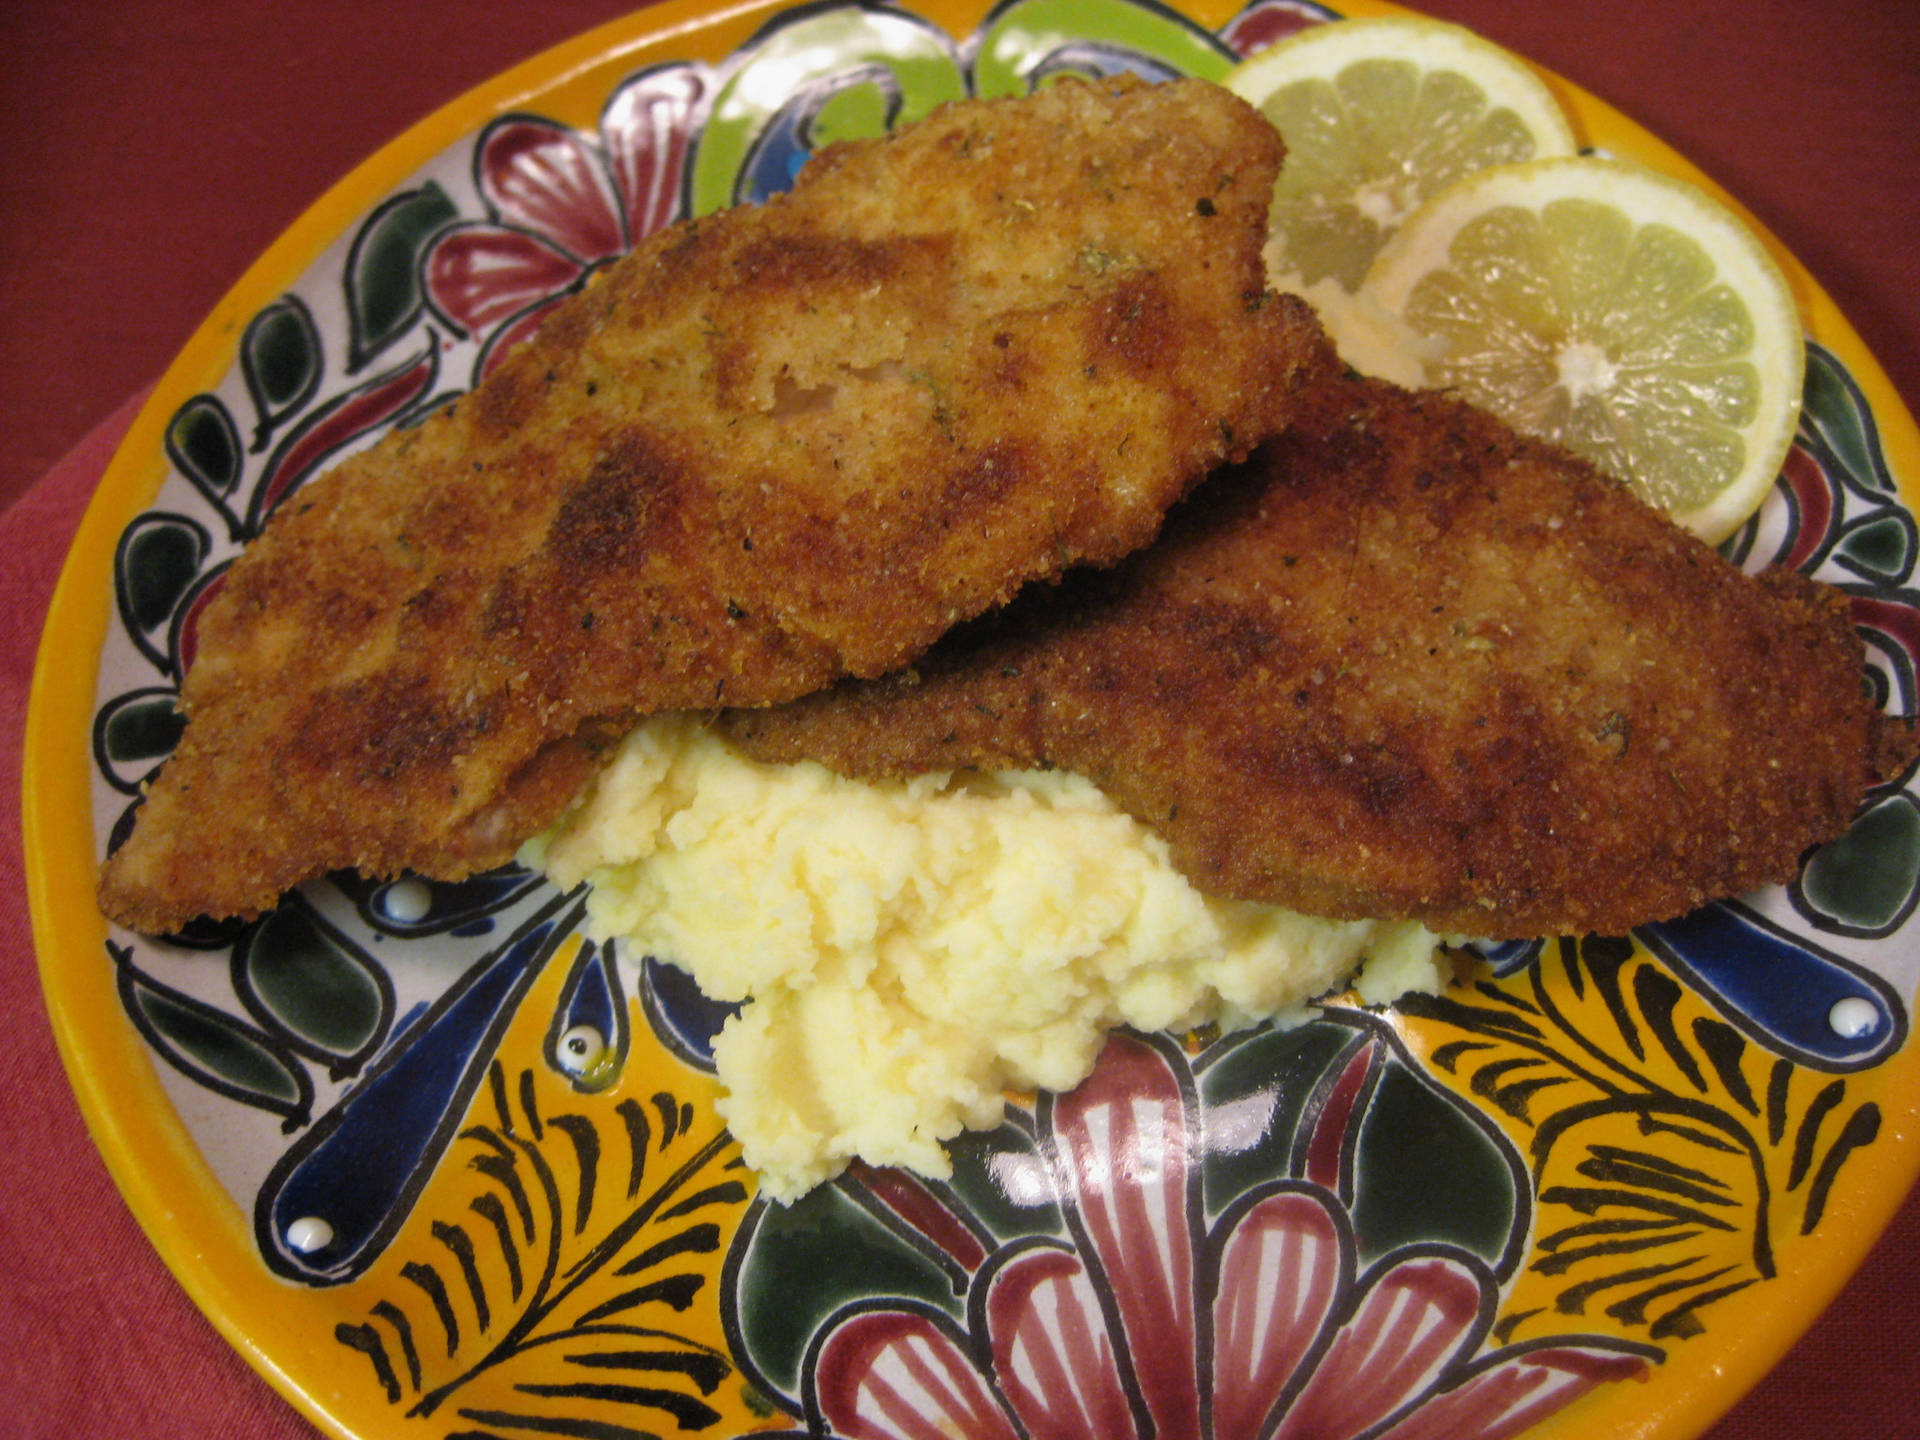 Delectable Wiener Schnitzel served with creamy mashed potatoes. Wallpaper